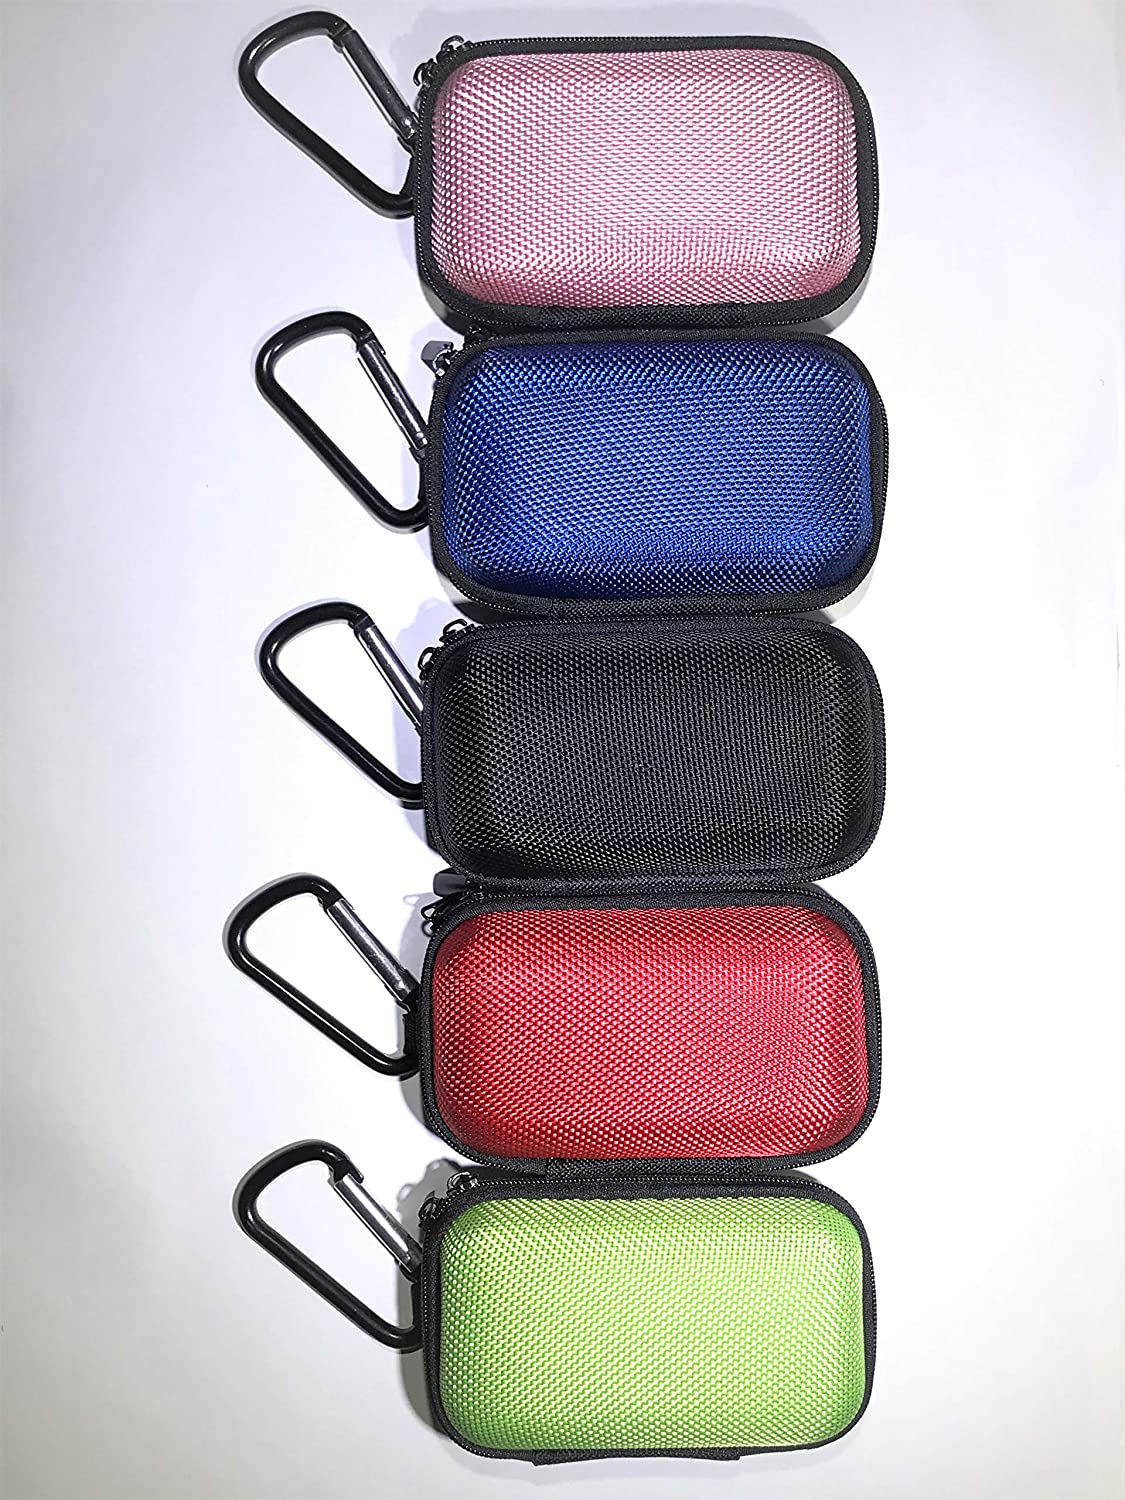 5 Pack of Colorful Rectangle Cases for Earbuds